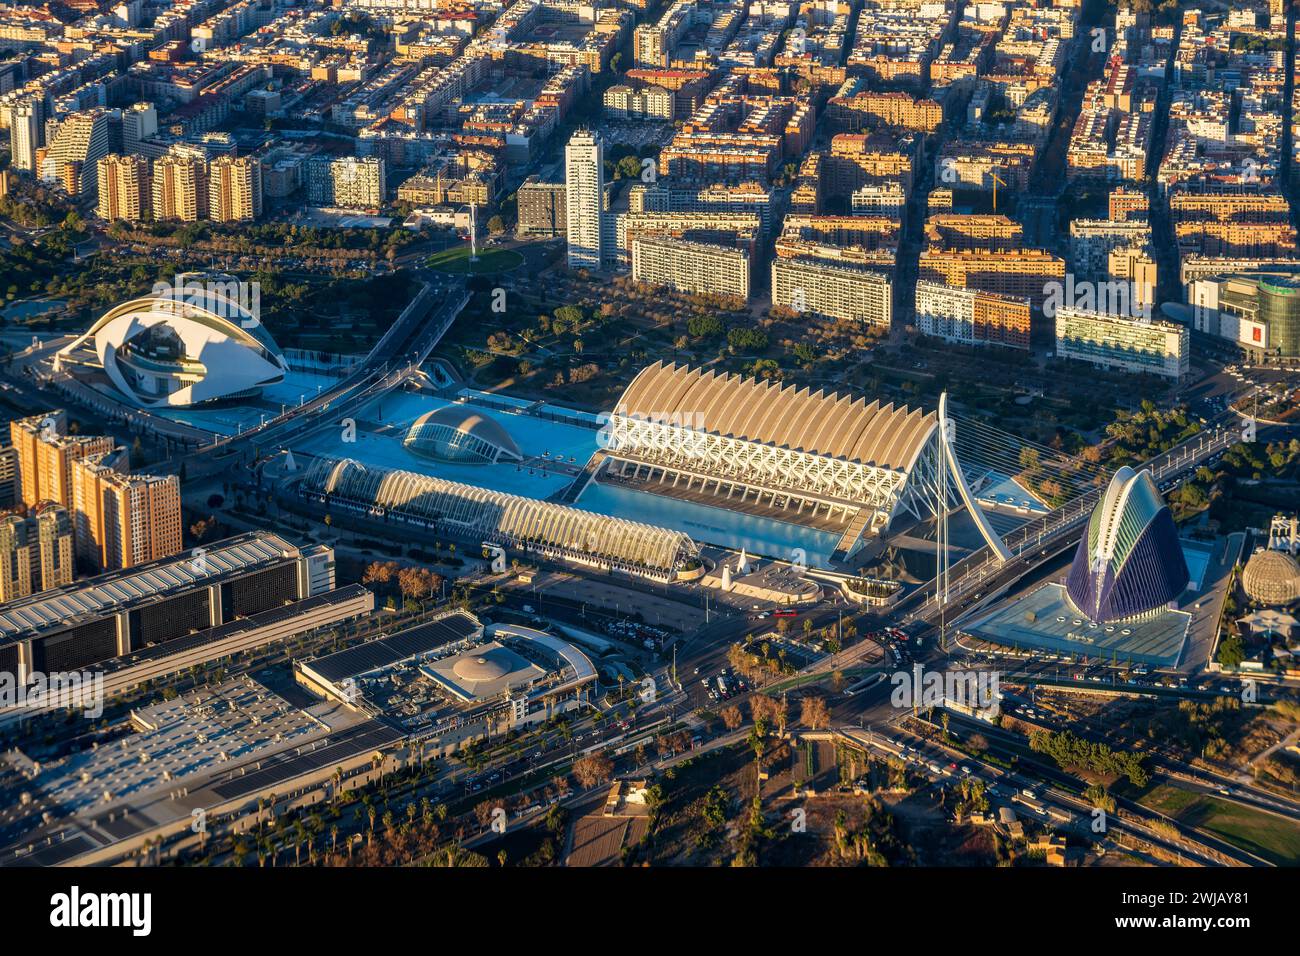 Aerial view of the City of Arts and Sciences, Valencia, Spain Stock Photo